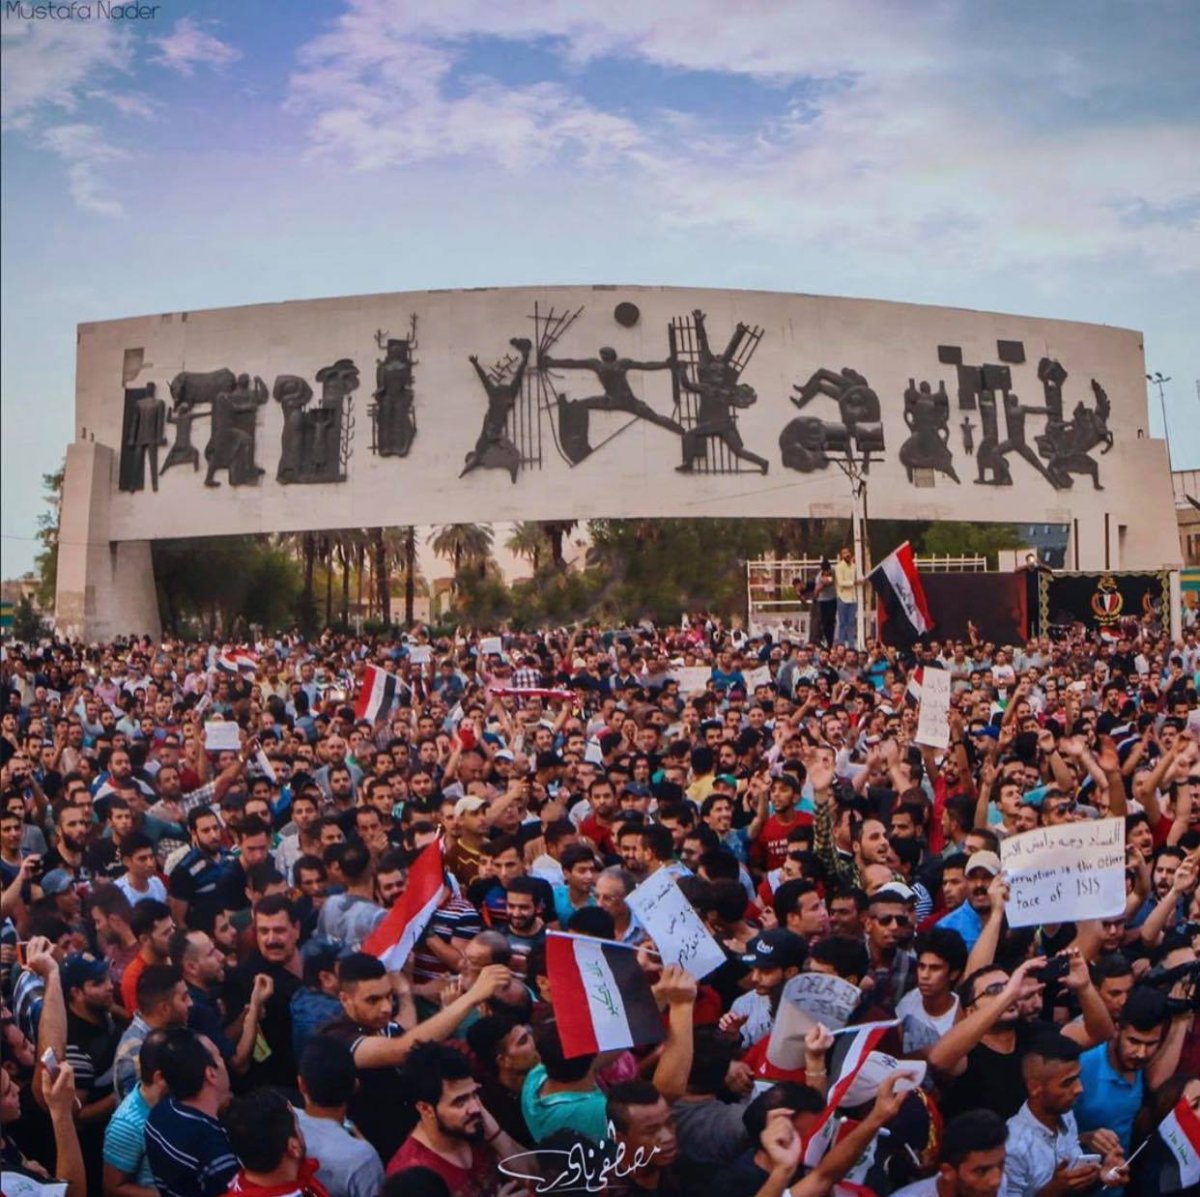 Protesters at Tahrir Square in Baghdad, Iraq.